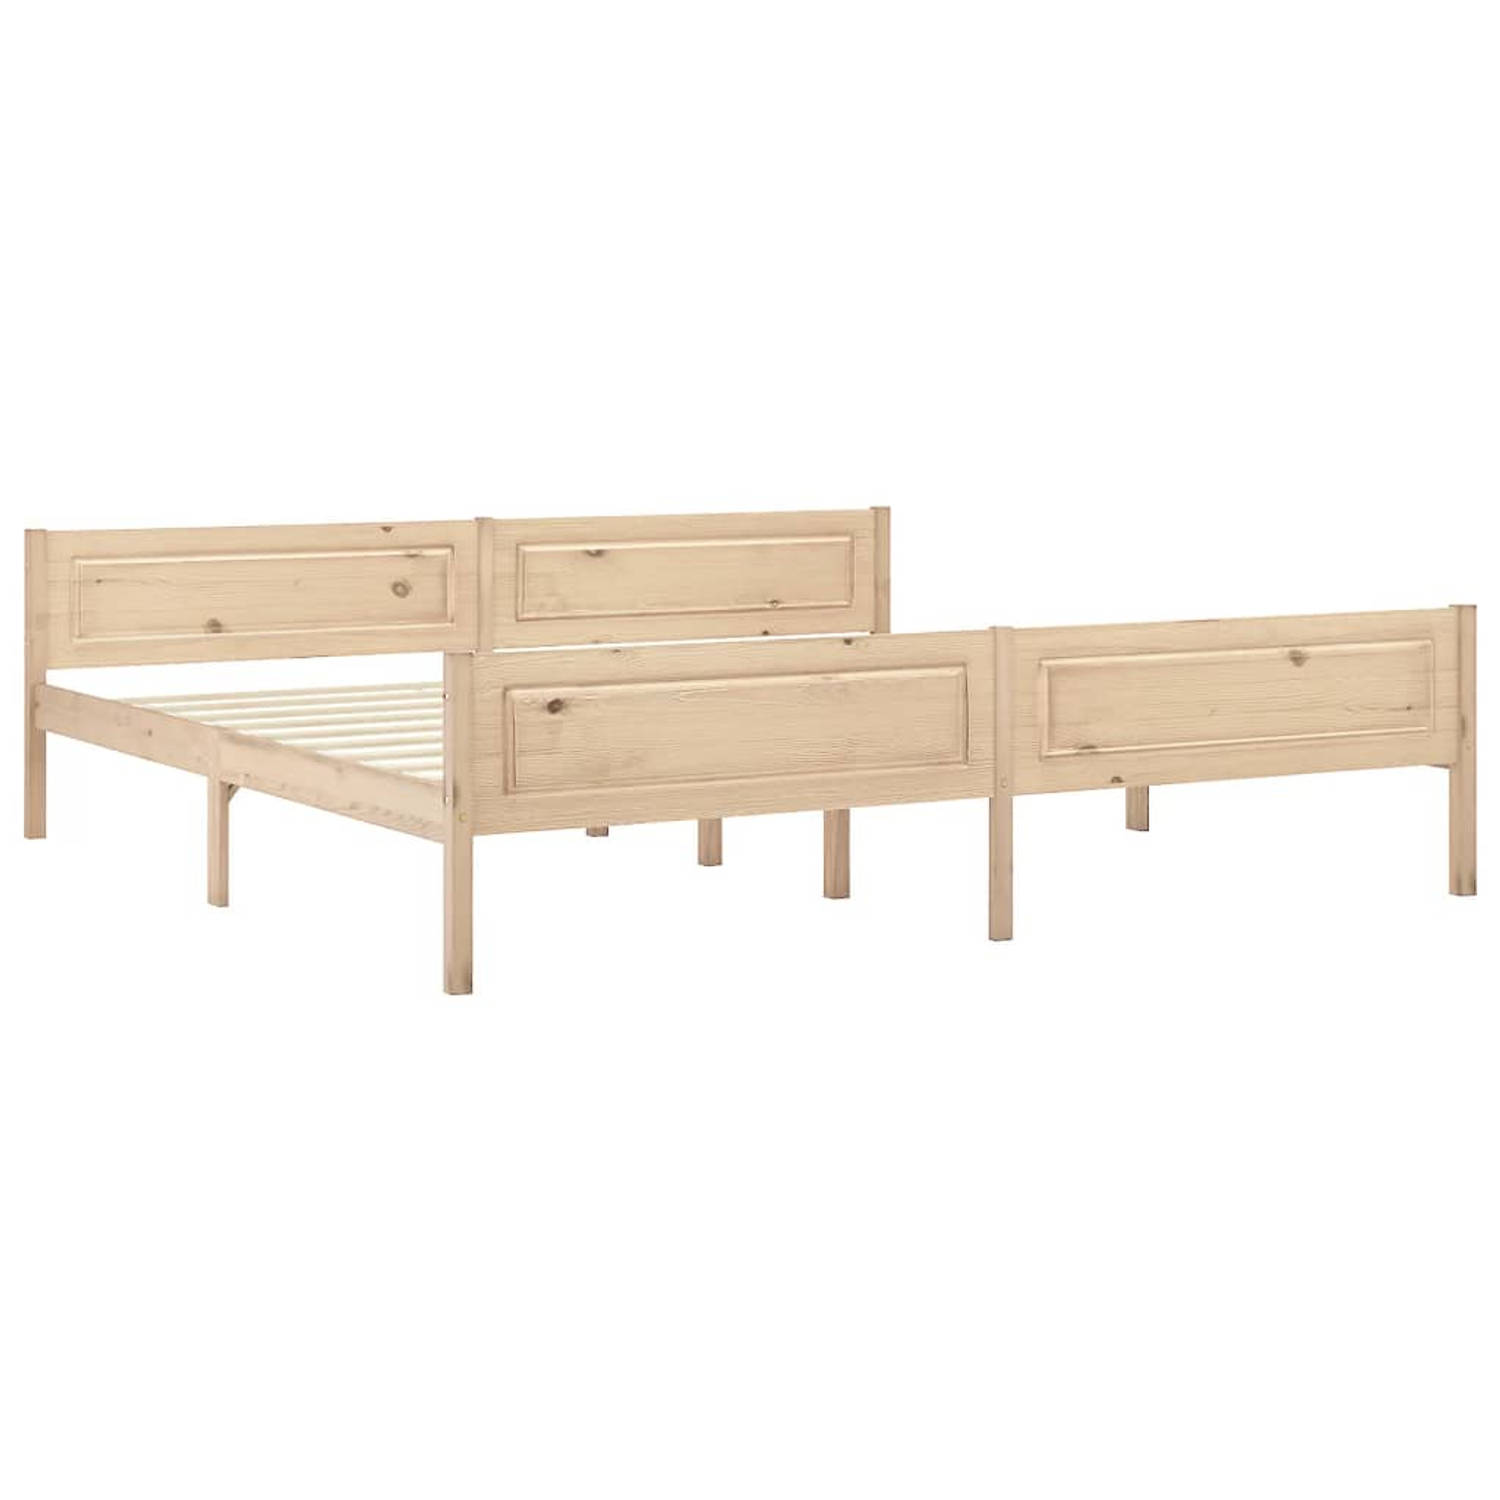 The Living Store Bedframe massief grenenhout 200x200 cm - Bedframe - Bedframe - Bed Frame - Bed Frames - Bed - Bedden - 2-persoonsbed - 2-persoonsbedden - Tweepersoons Bed